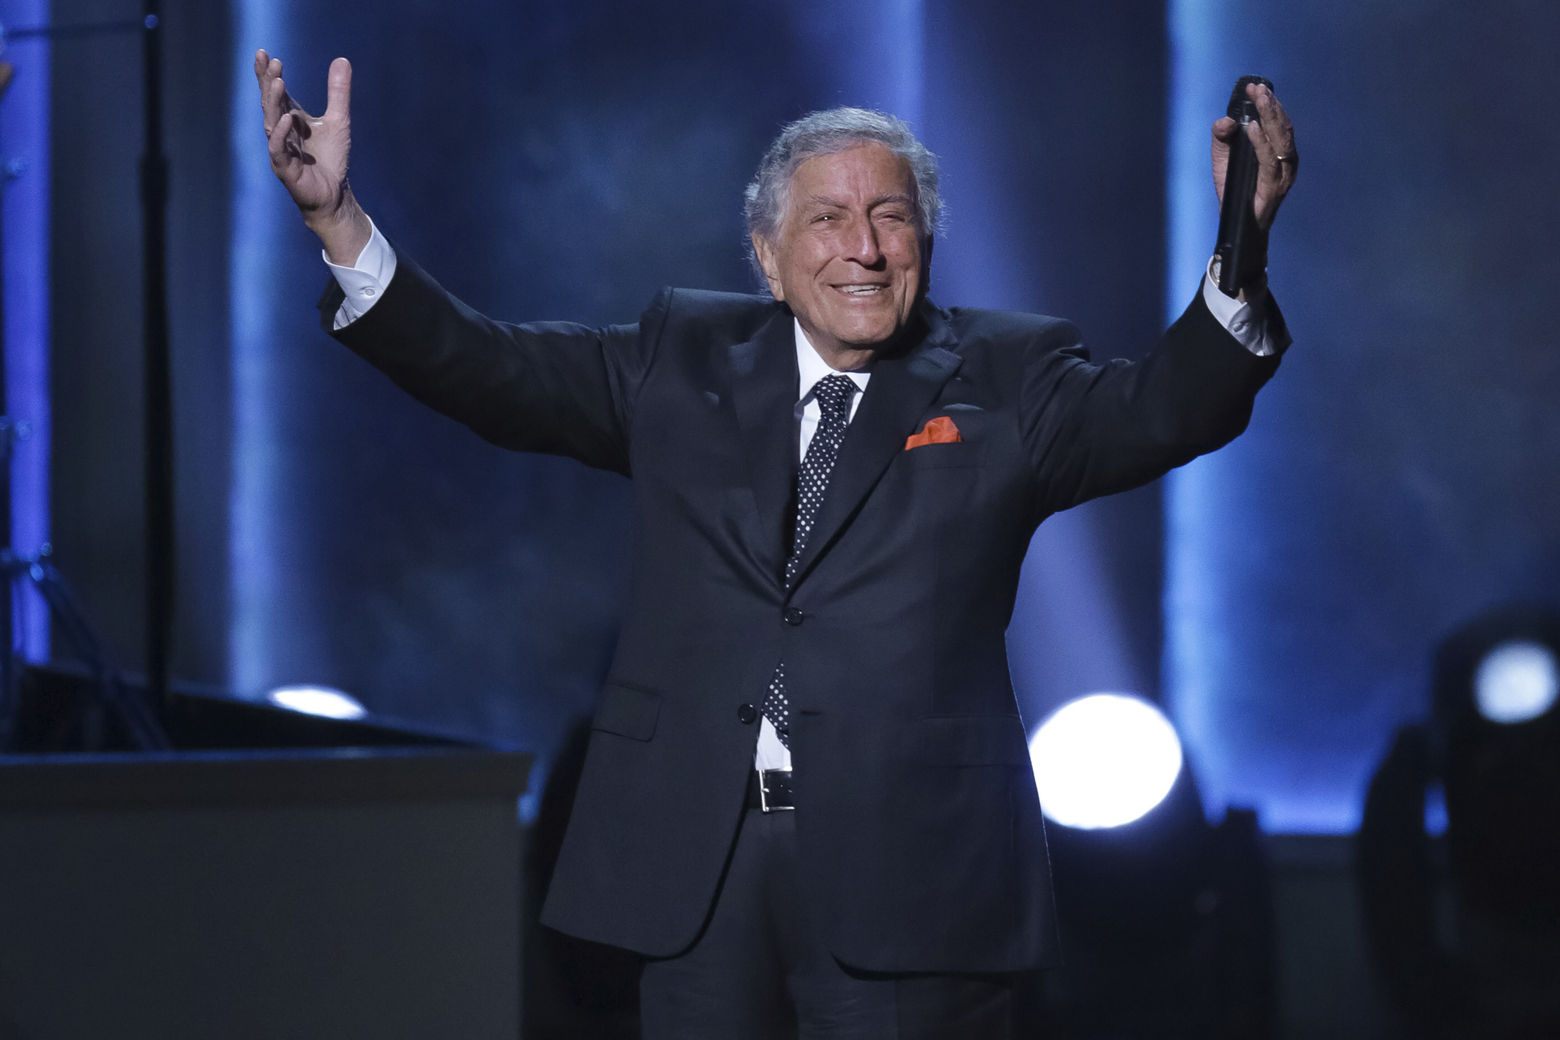 Singer/honoree Tony Bennett performs onstage during the 2017 Gershwin Prize Honoree's Tribute Concert at the DAR Constitution Hall on Wednesday, Nov. 15, 2017 in Washington. (Photo by Brent N. Clarke/Invision/AP)